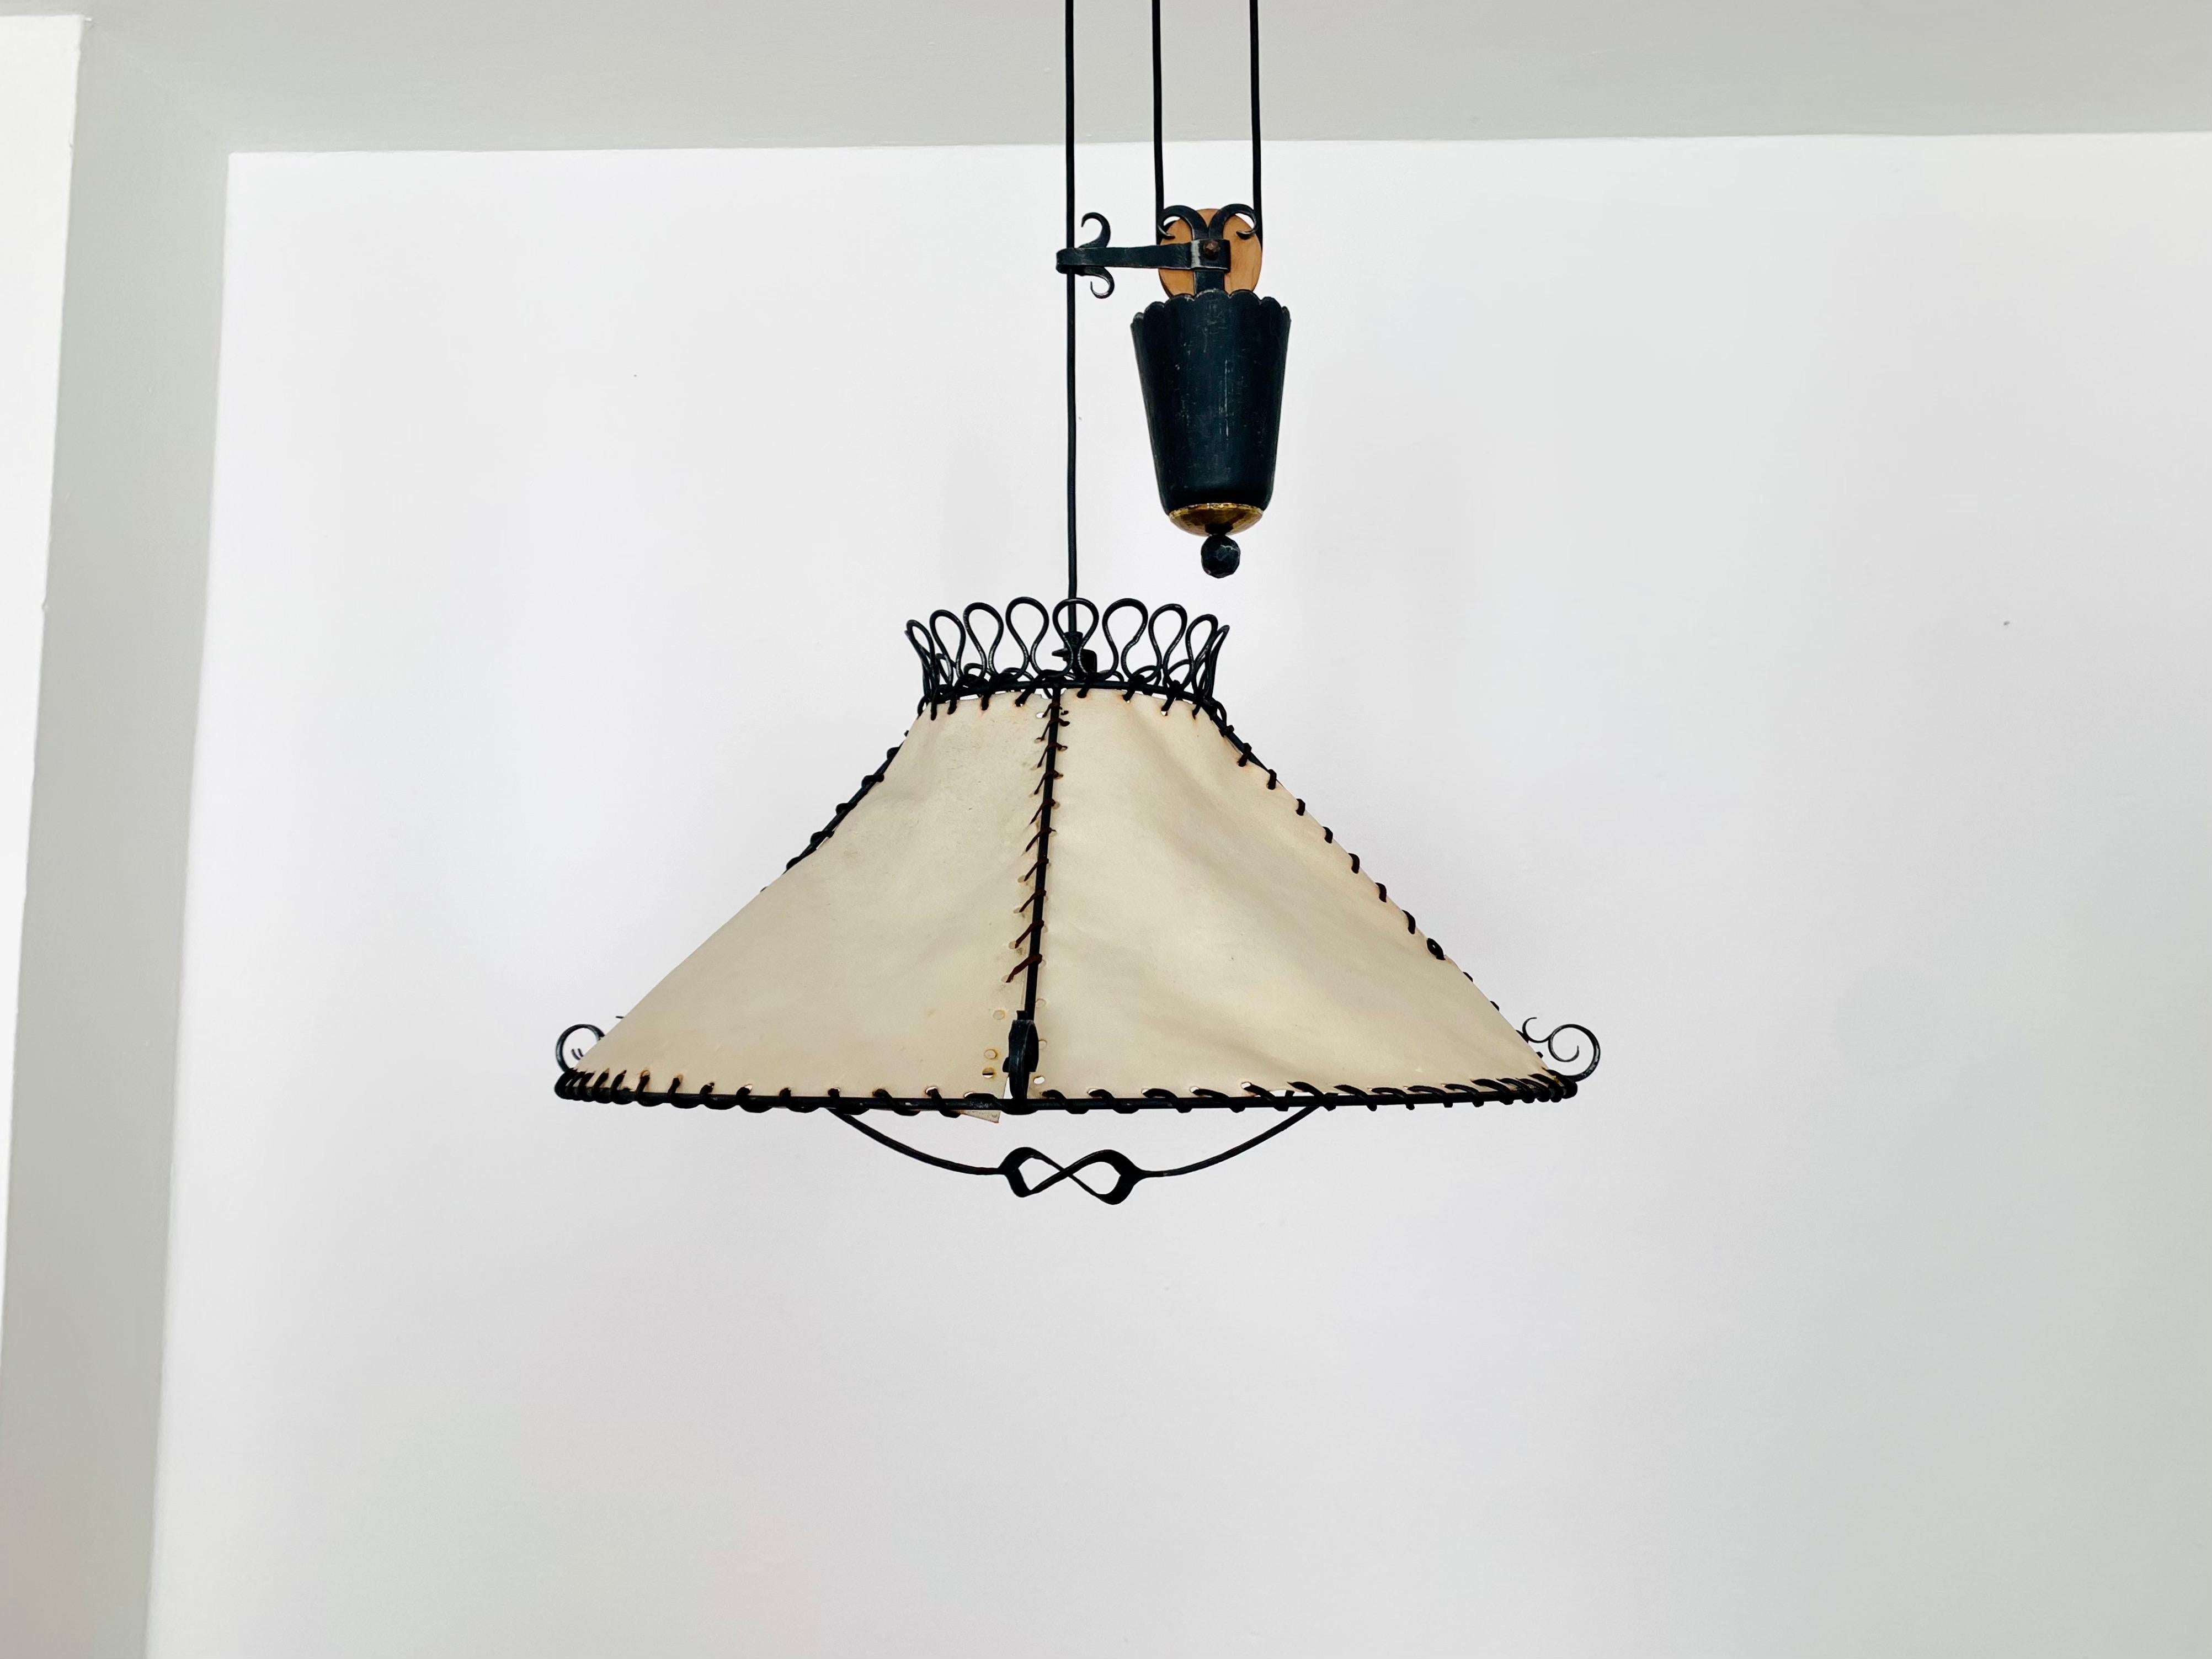 German Adjustable Iron Pendant Lamp with Counterweight For Sale